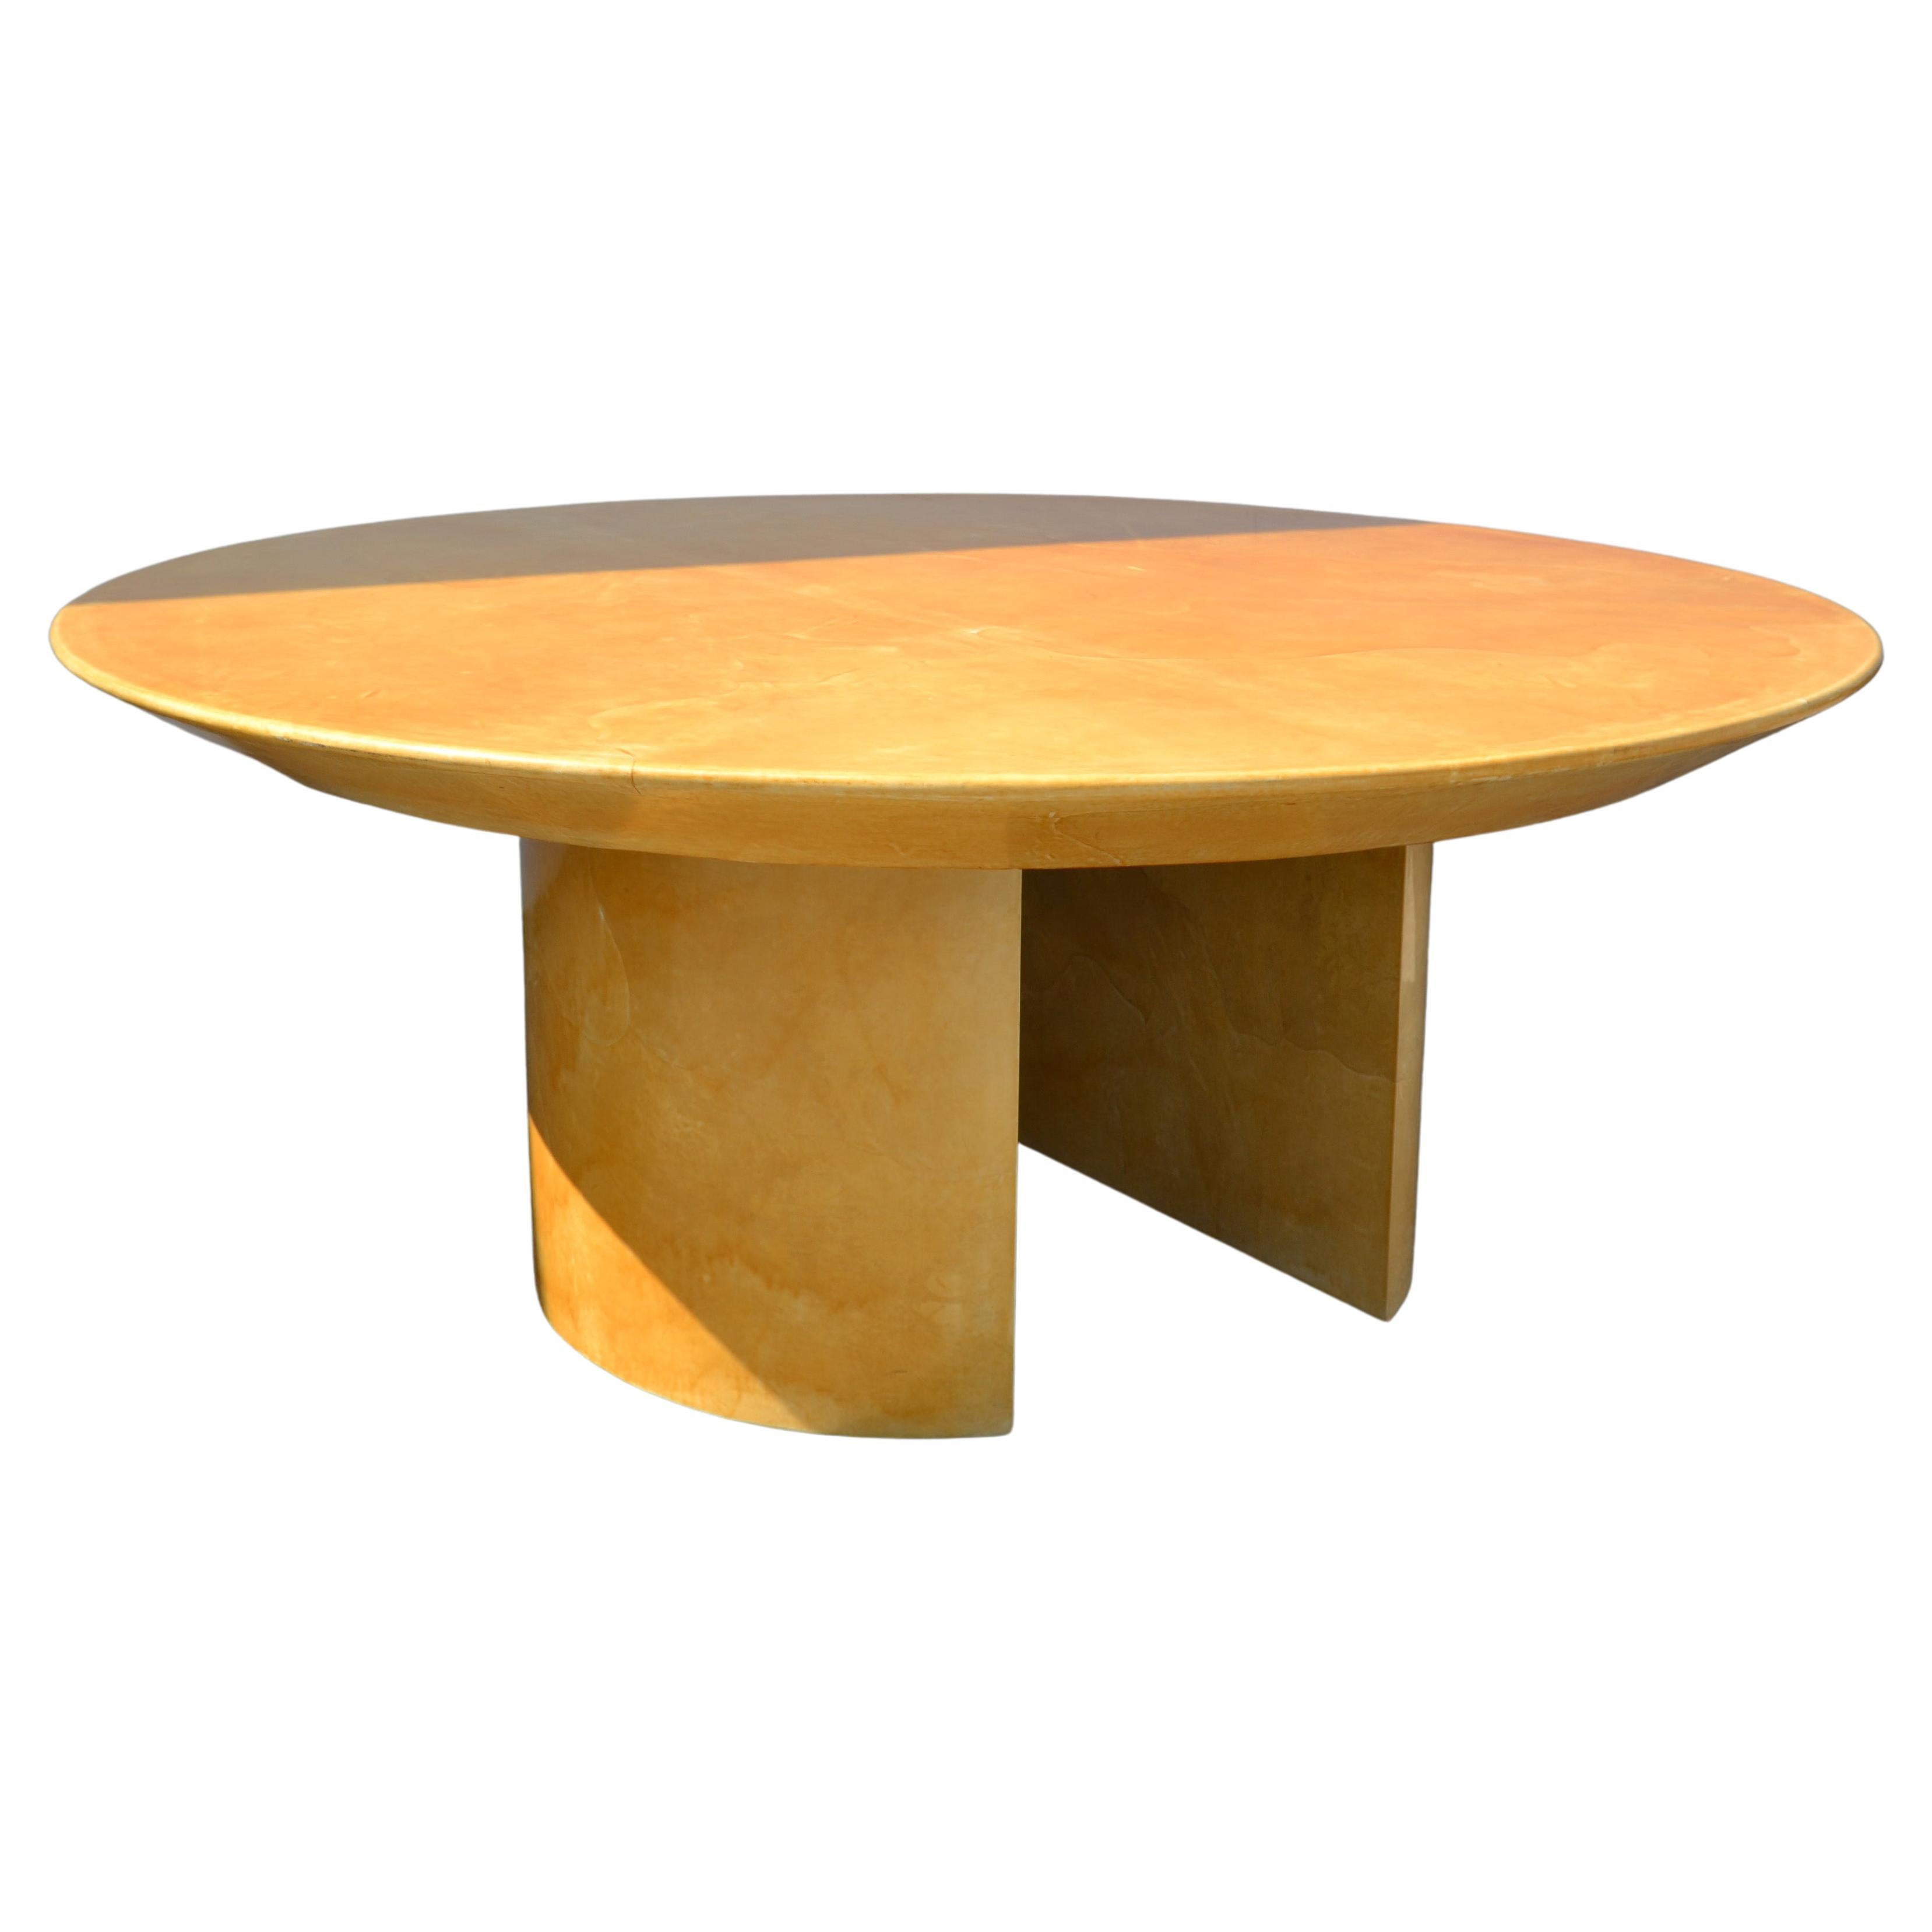 Karl Spring Mid-Century Modern Lacquered Goat Skin Dining, Conference Table 70s